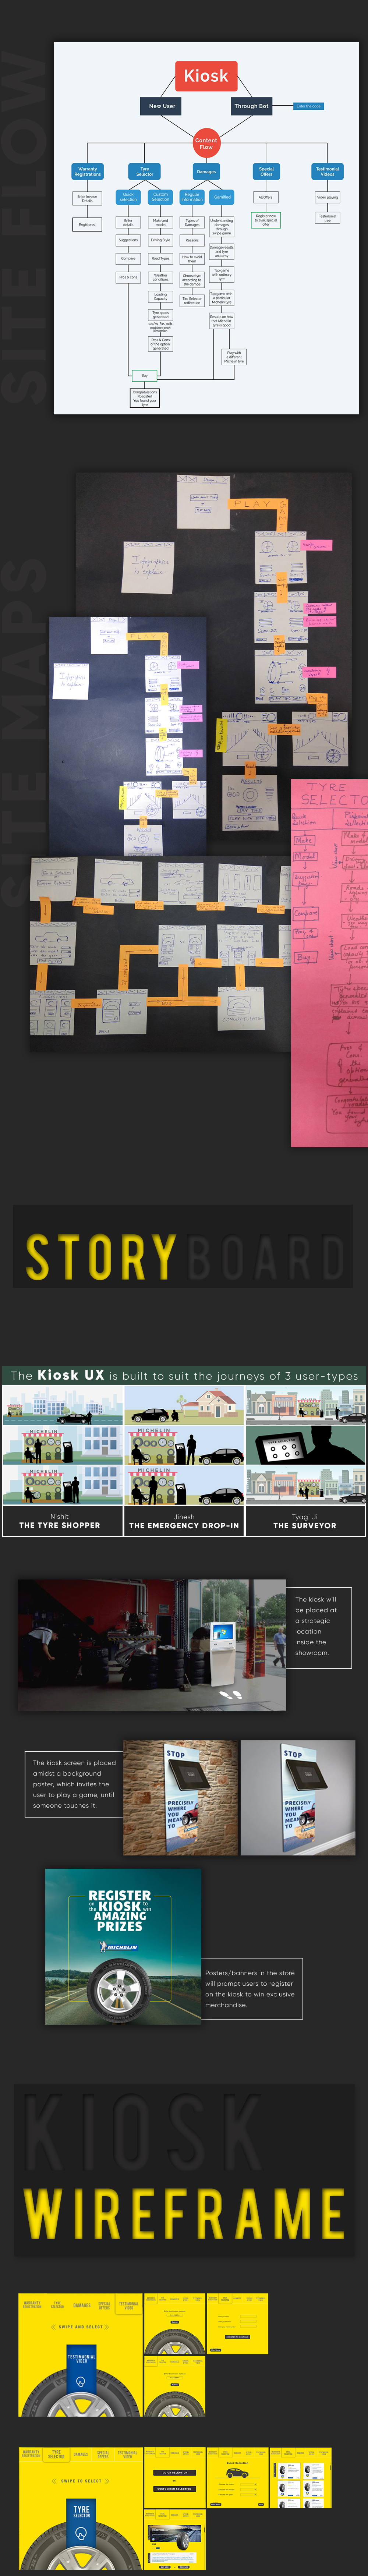 ux Interaction design  storyboarding   experience design UI storytelling   concept